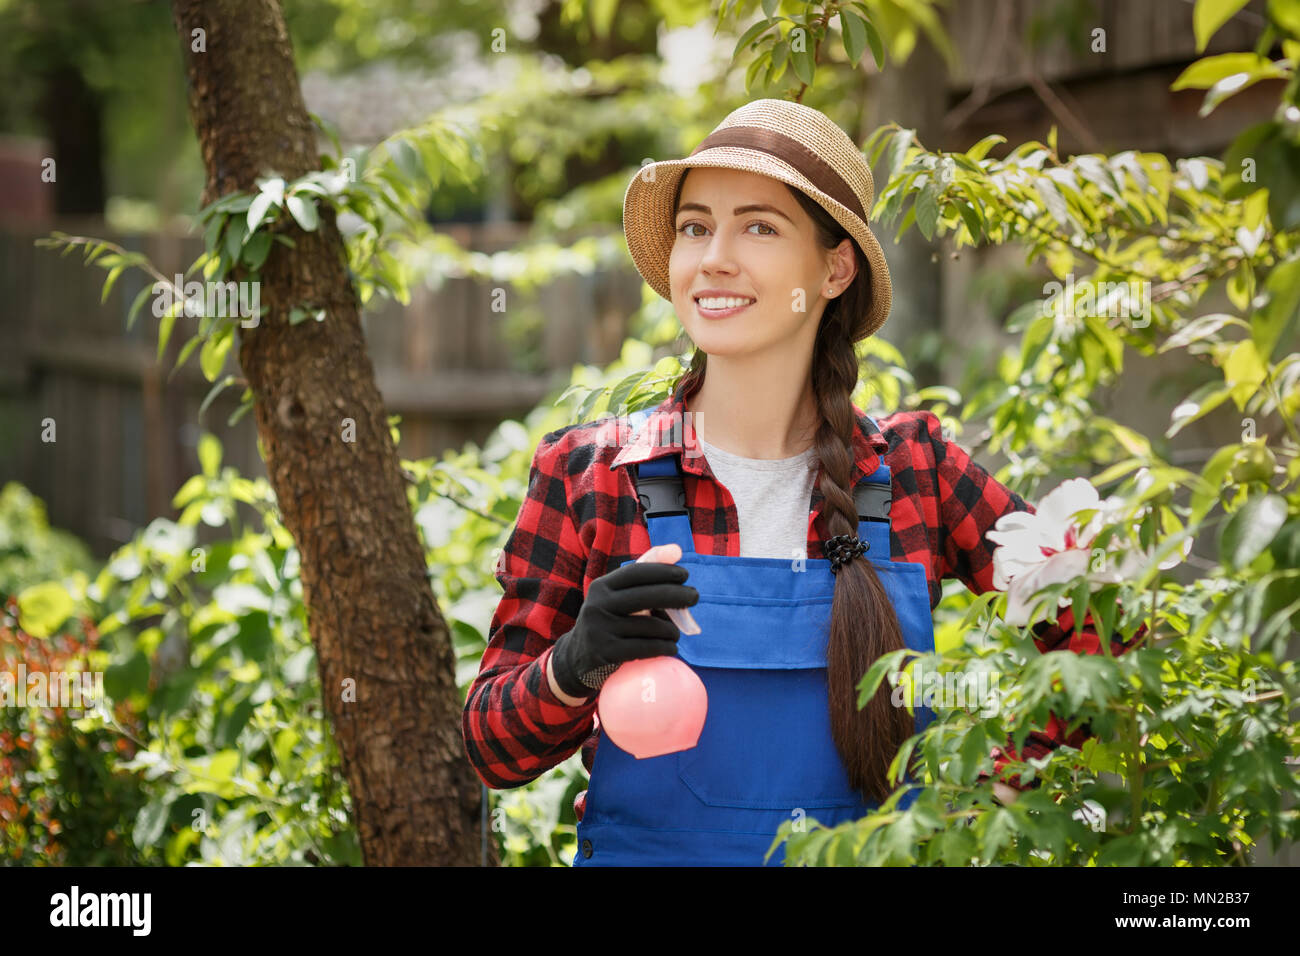 portrait of female gardener in work clothes with spray bottle Stock Photo